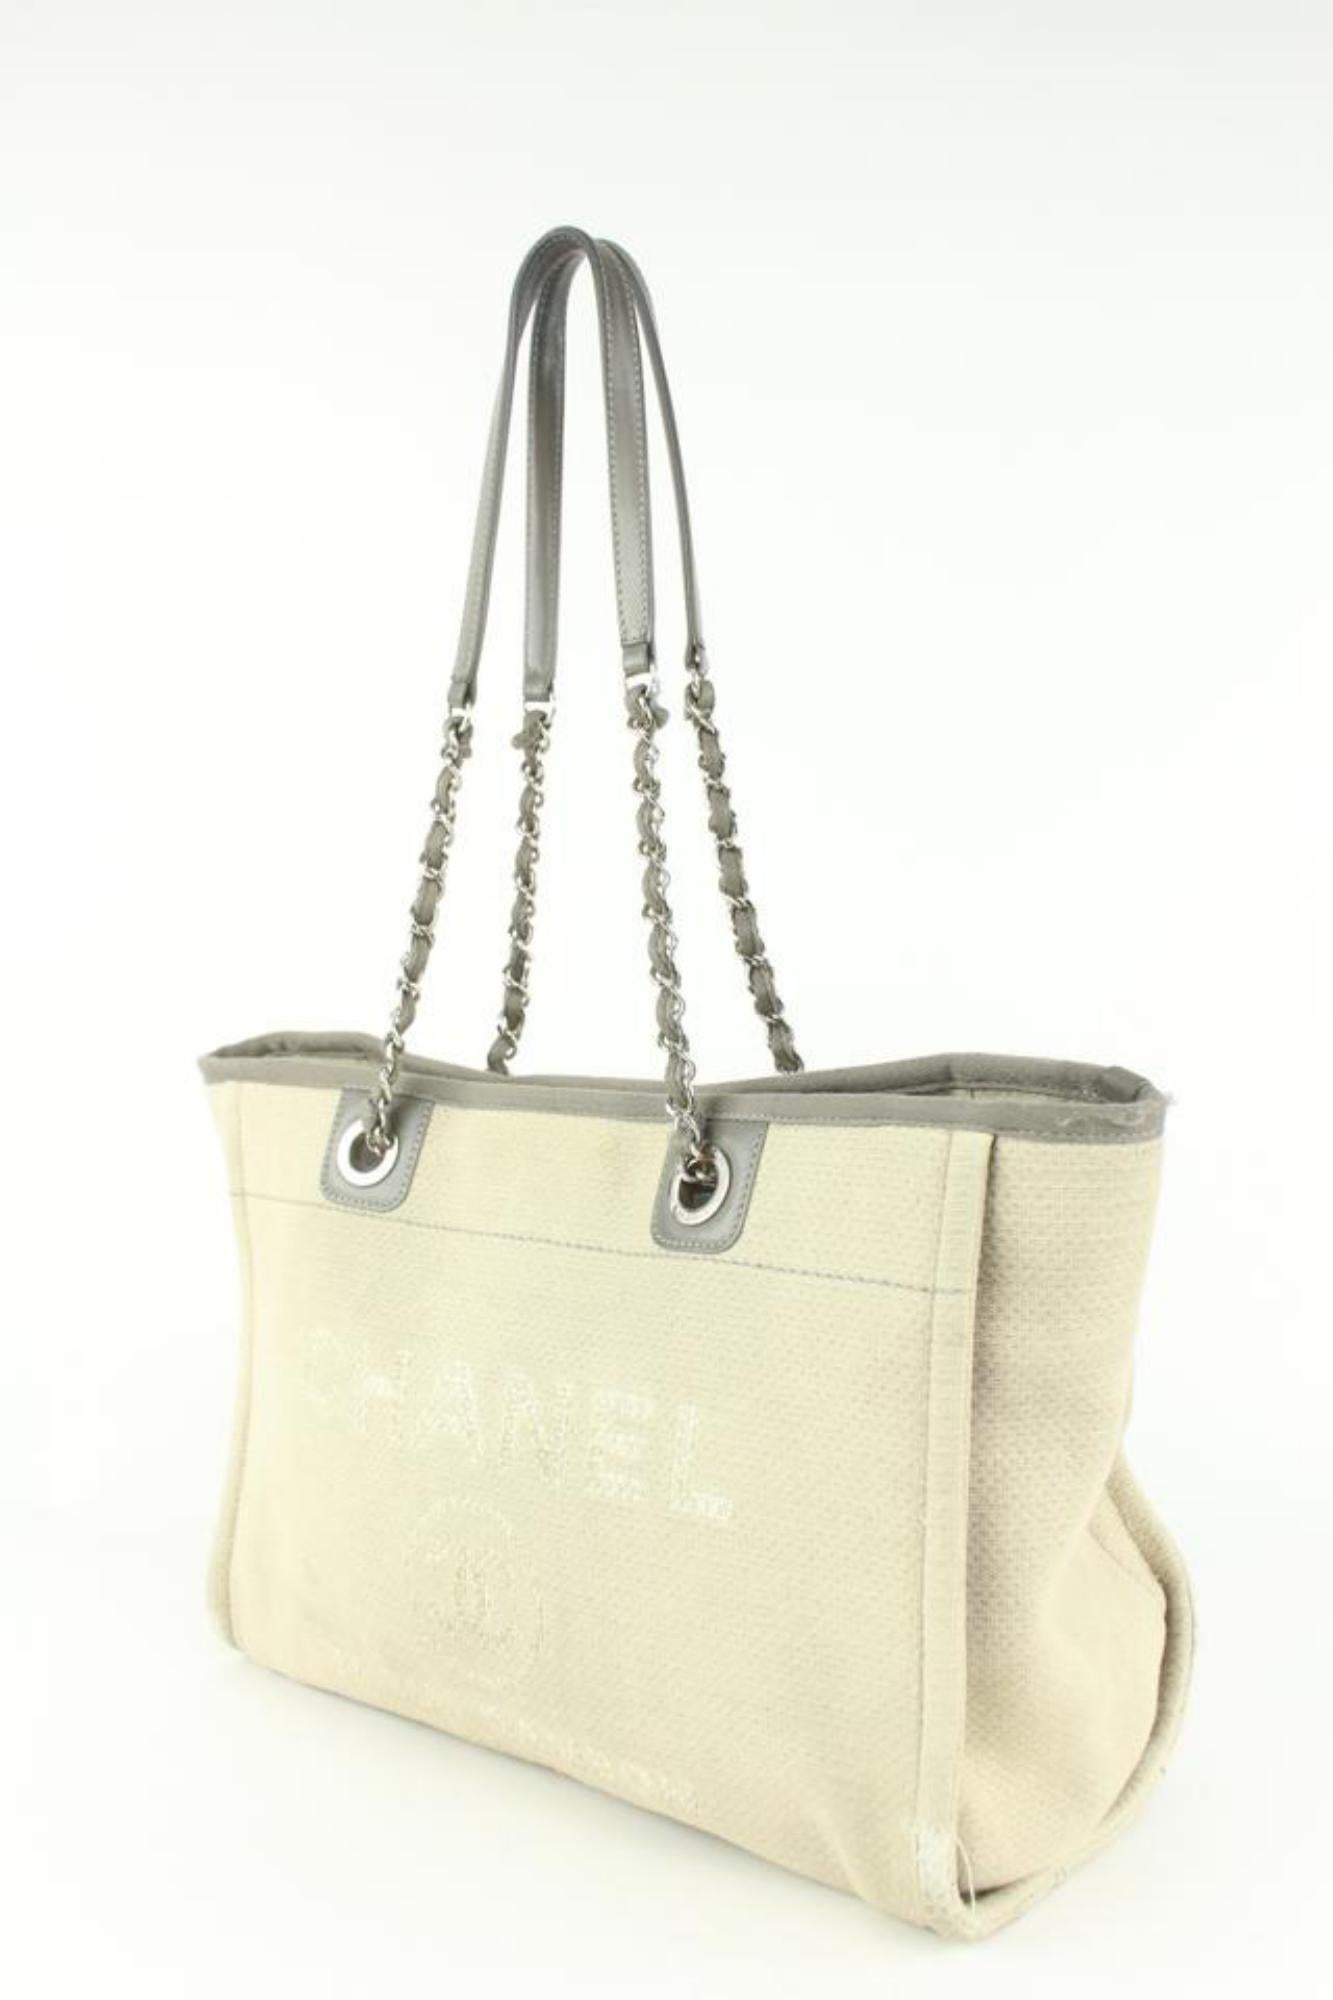 Chanel Grey x Greige x Beige Deauville Chain Tote Bag 108c56 For Sale 5